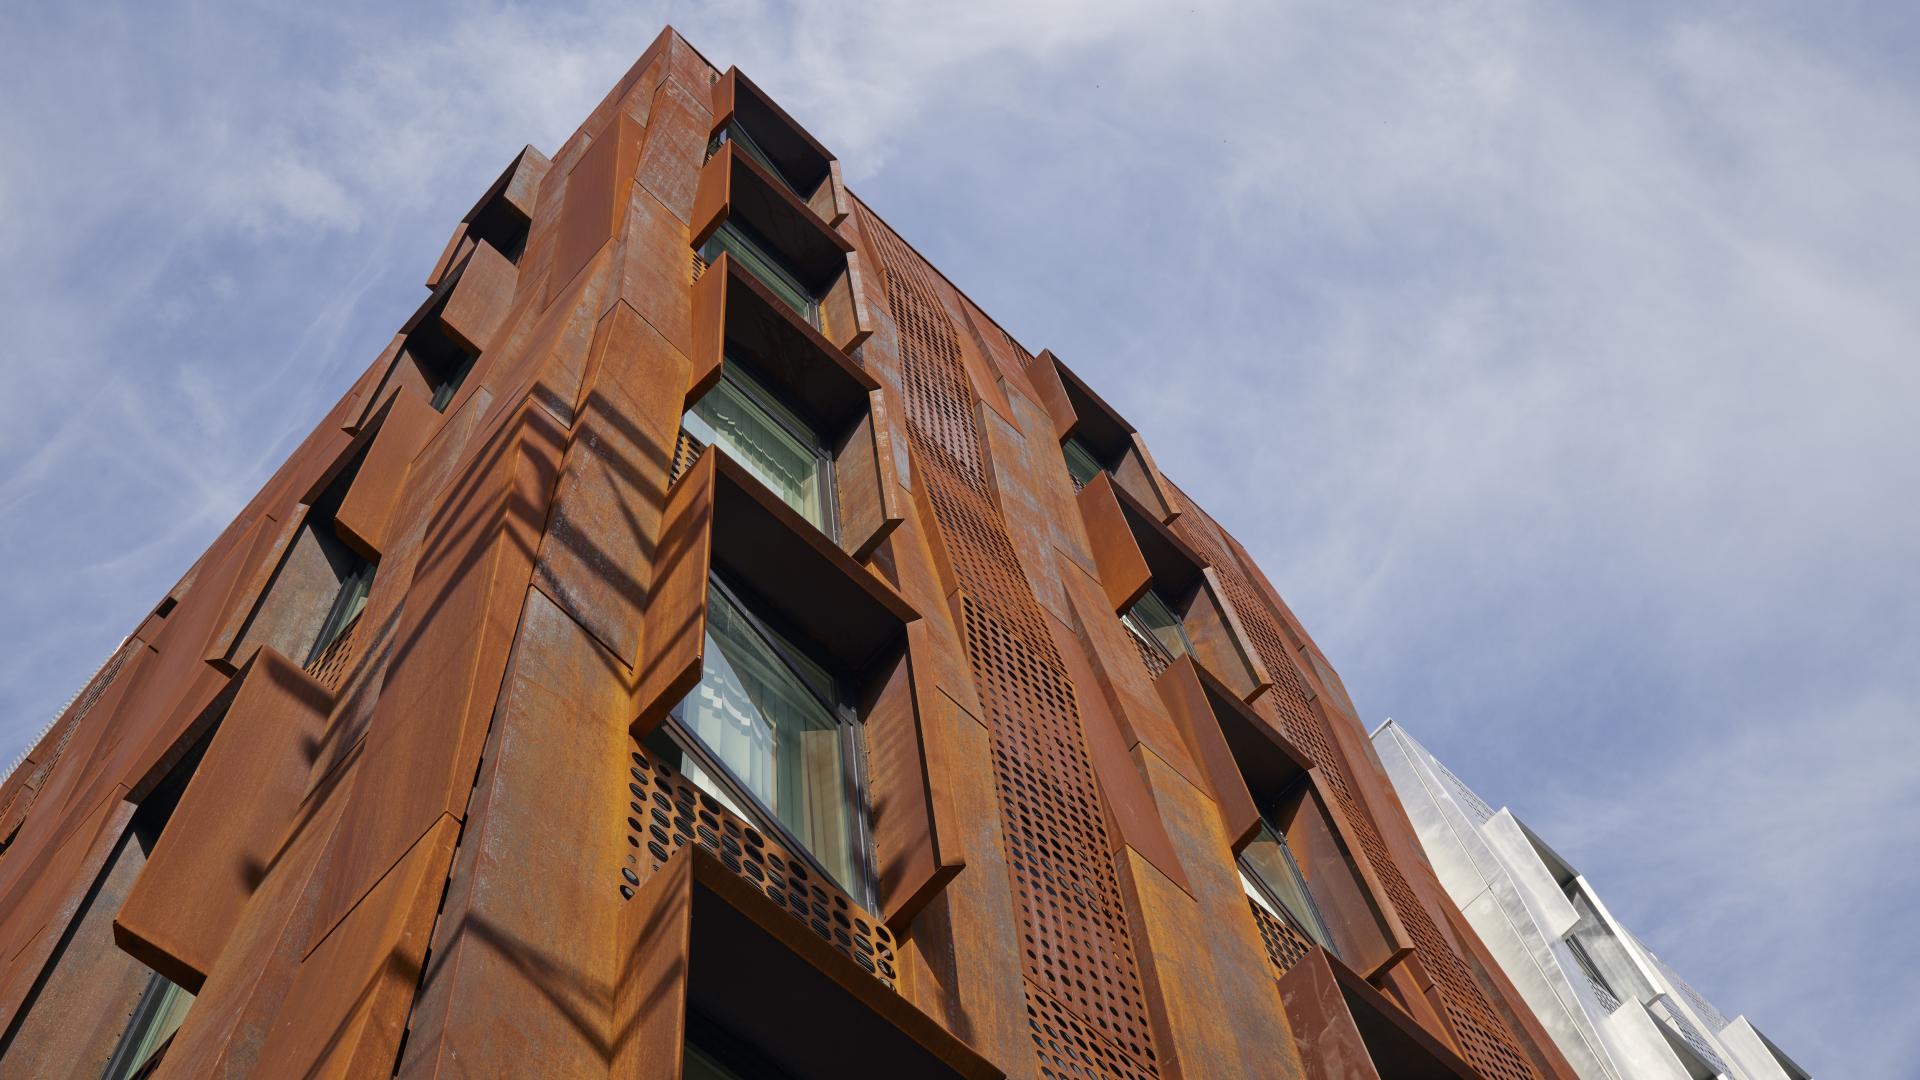 Detail of weathering steel rainscreen at corner, with clouded blue sky.